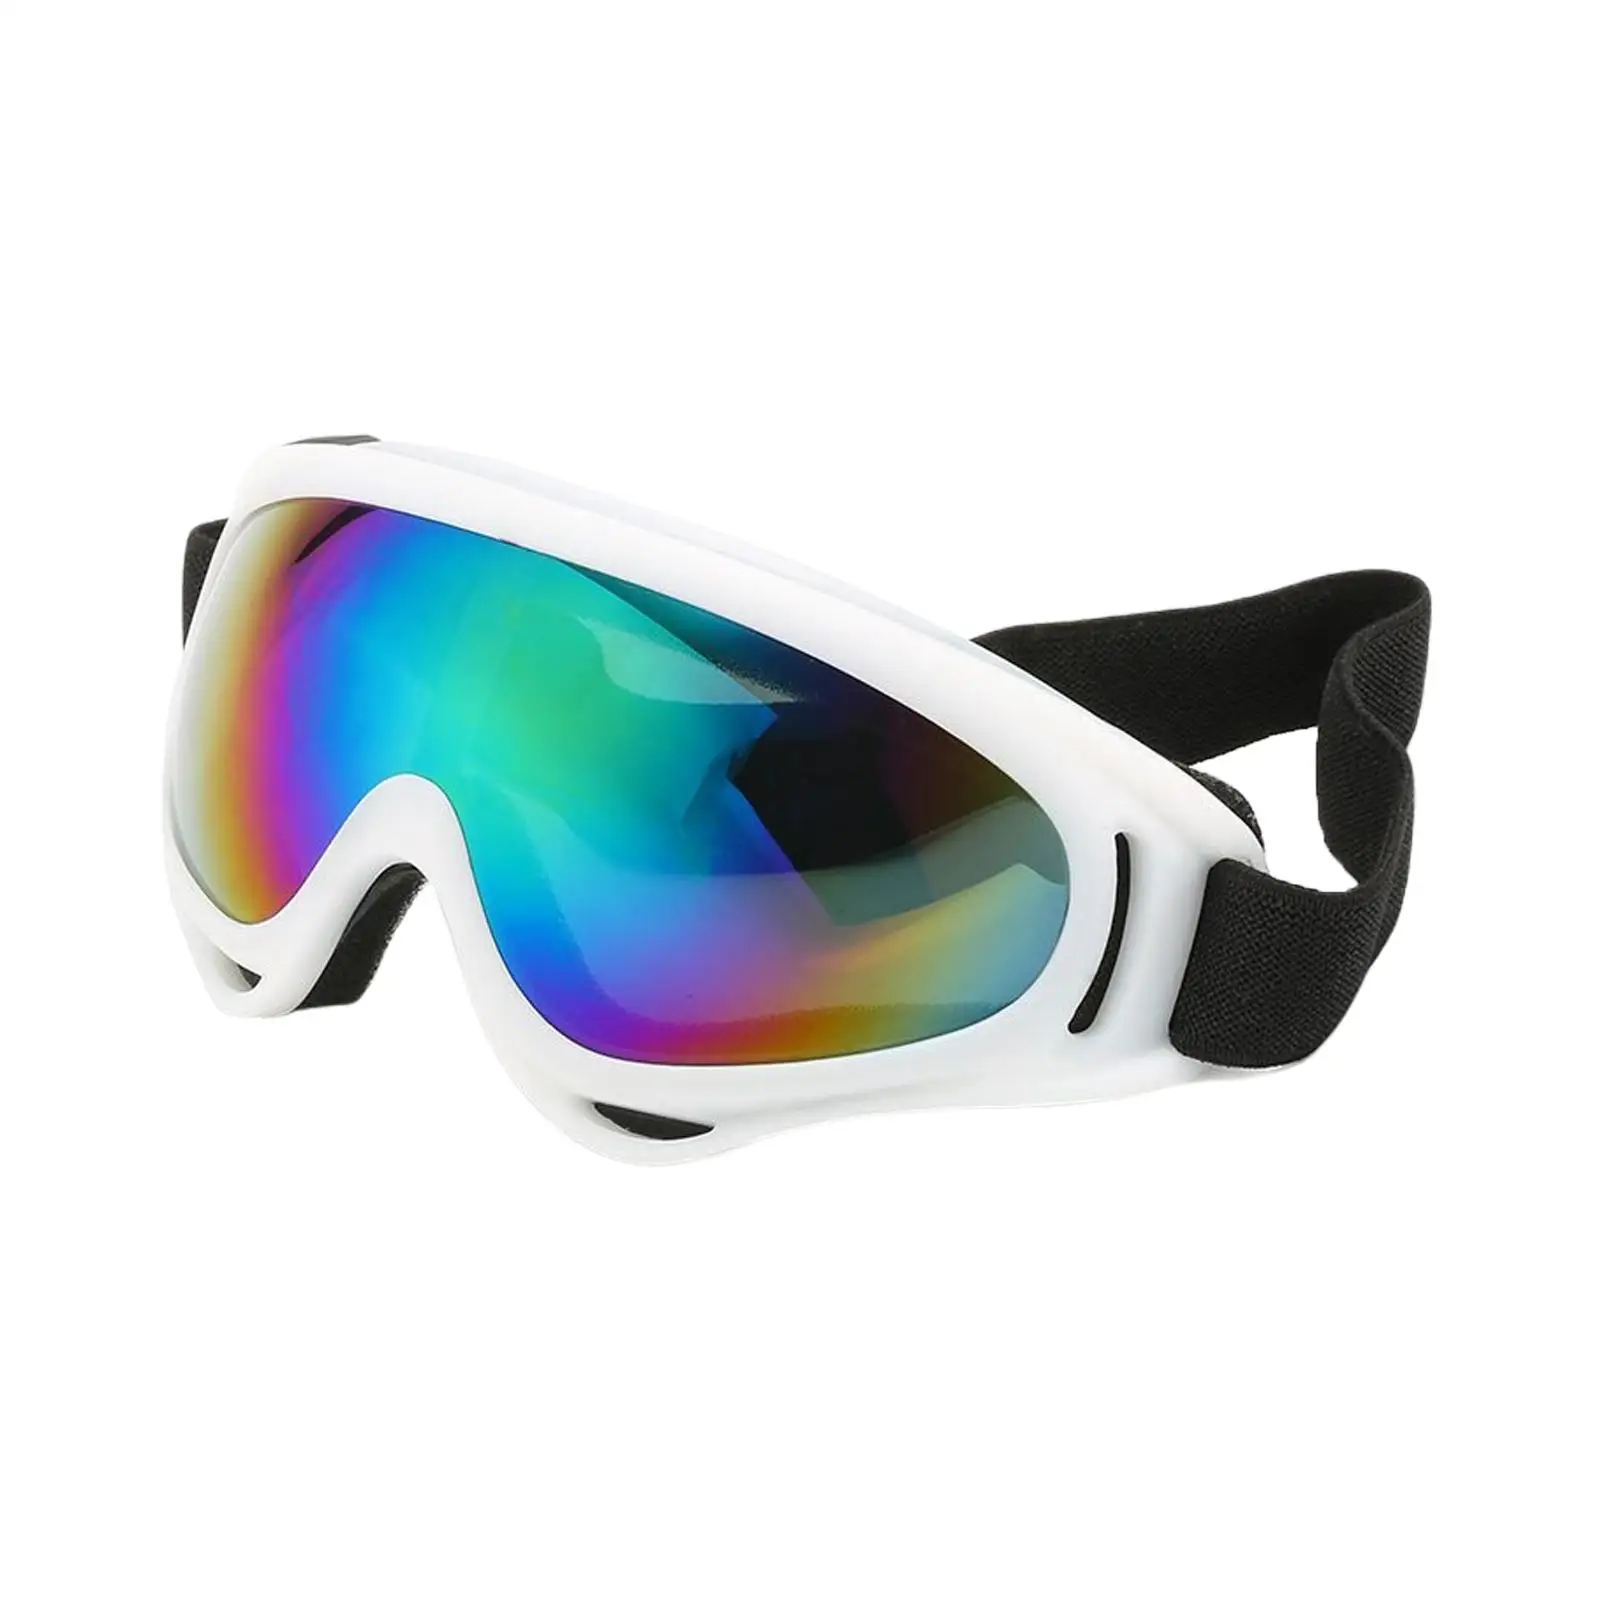 Goggles Glasses Sunglasses Motorcycle Protective Windproof